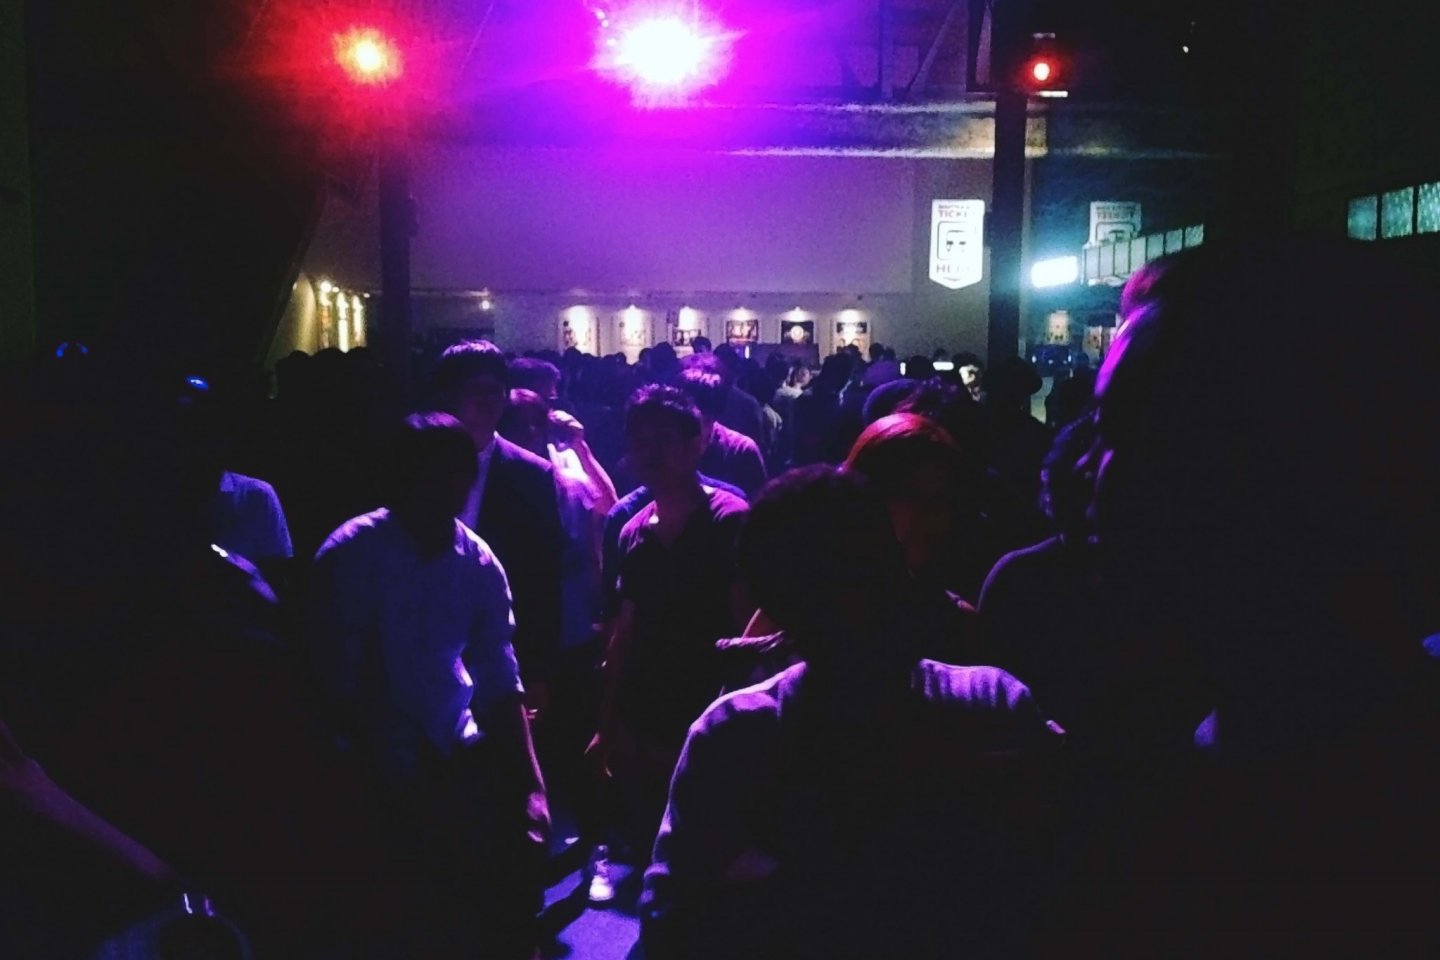 One of the smaller dance floors located in AgeHa